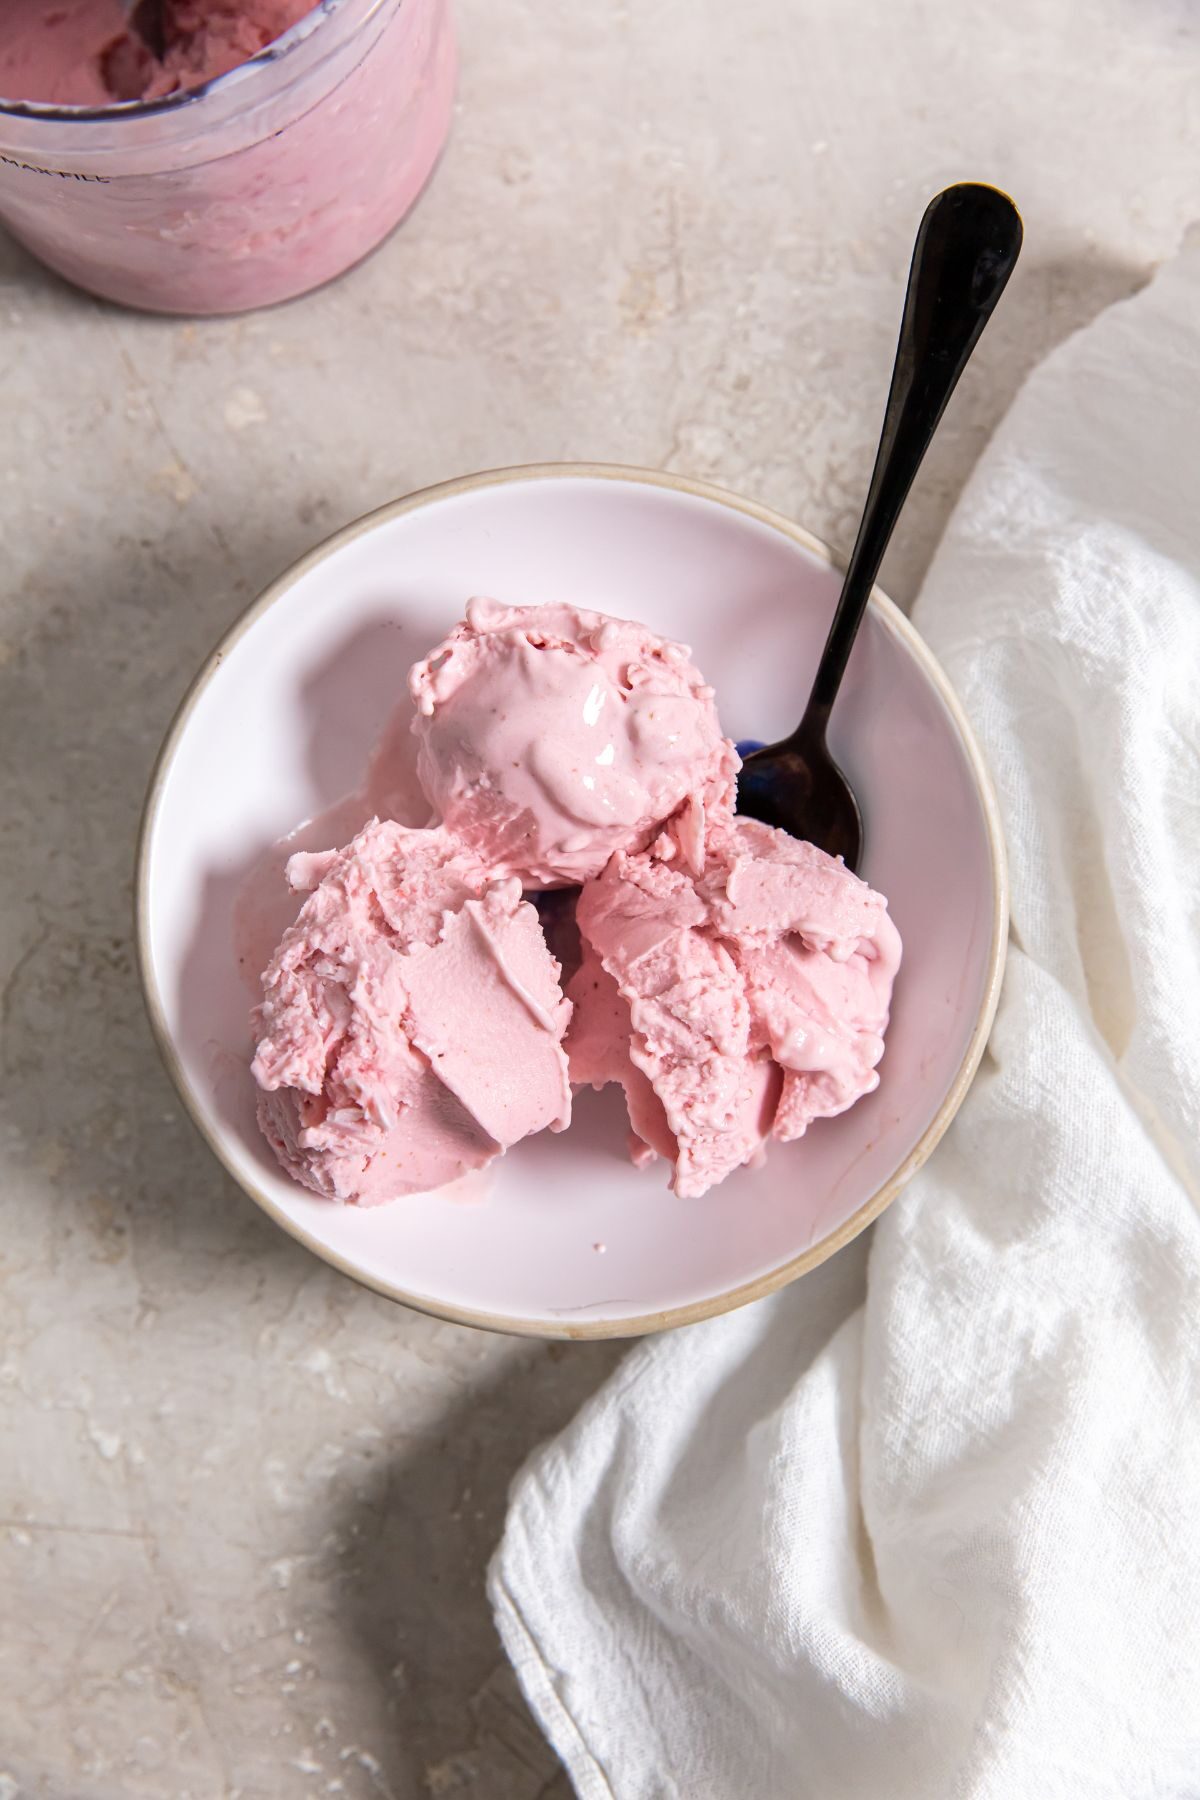 Ninja Creami Strawberry ice cream in a small white bowl with a black spoon